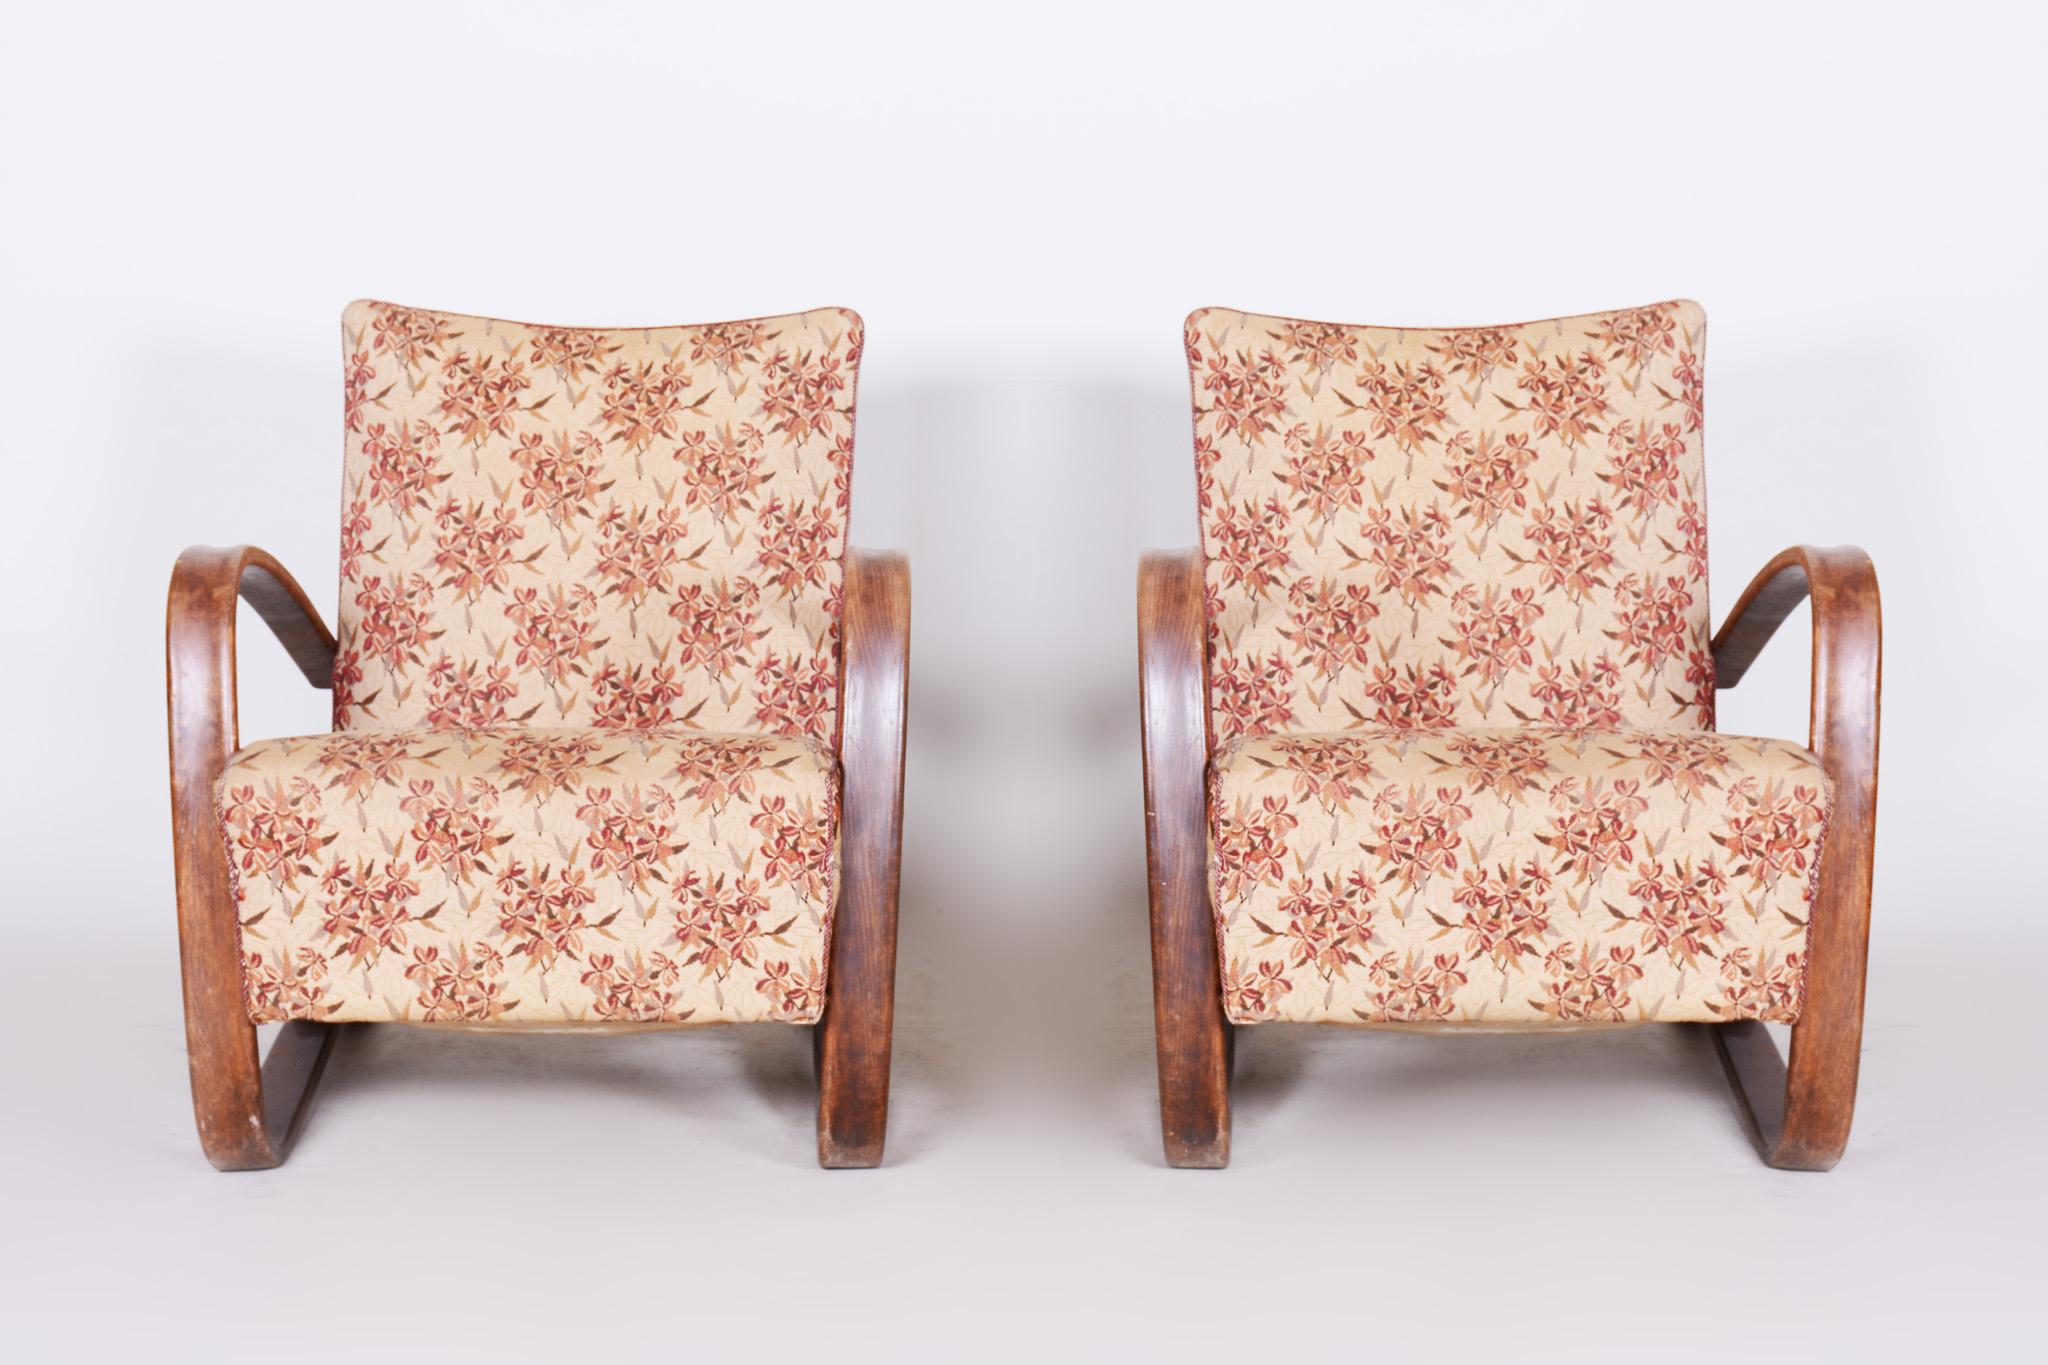 Pair of Art Deco armchairs. Product number H-269.
United Arts & Crafts manufacture. Designed by Jindrich Halabala.
Original very well preserved condition.
Material: Beech
Period: 1930-1939
Source: Czechoslovakia.